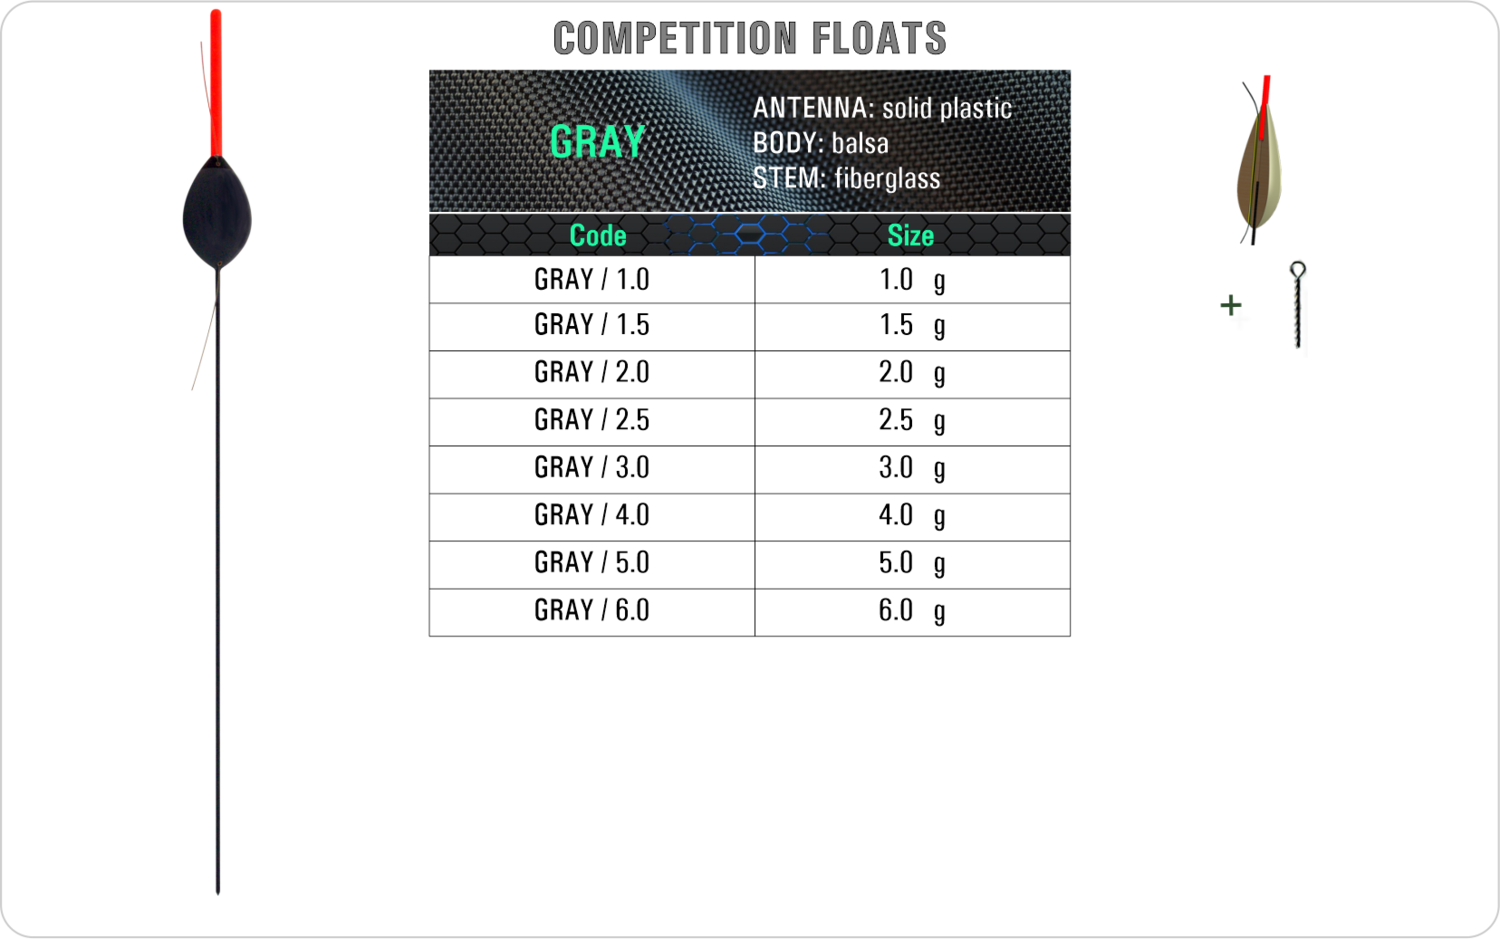 GRAY Competition float model and table containing an additional information about this float with different codes, sizes, types of the body, the stem and the antenna of the float.